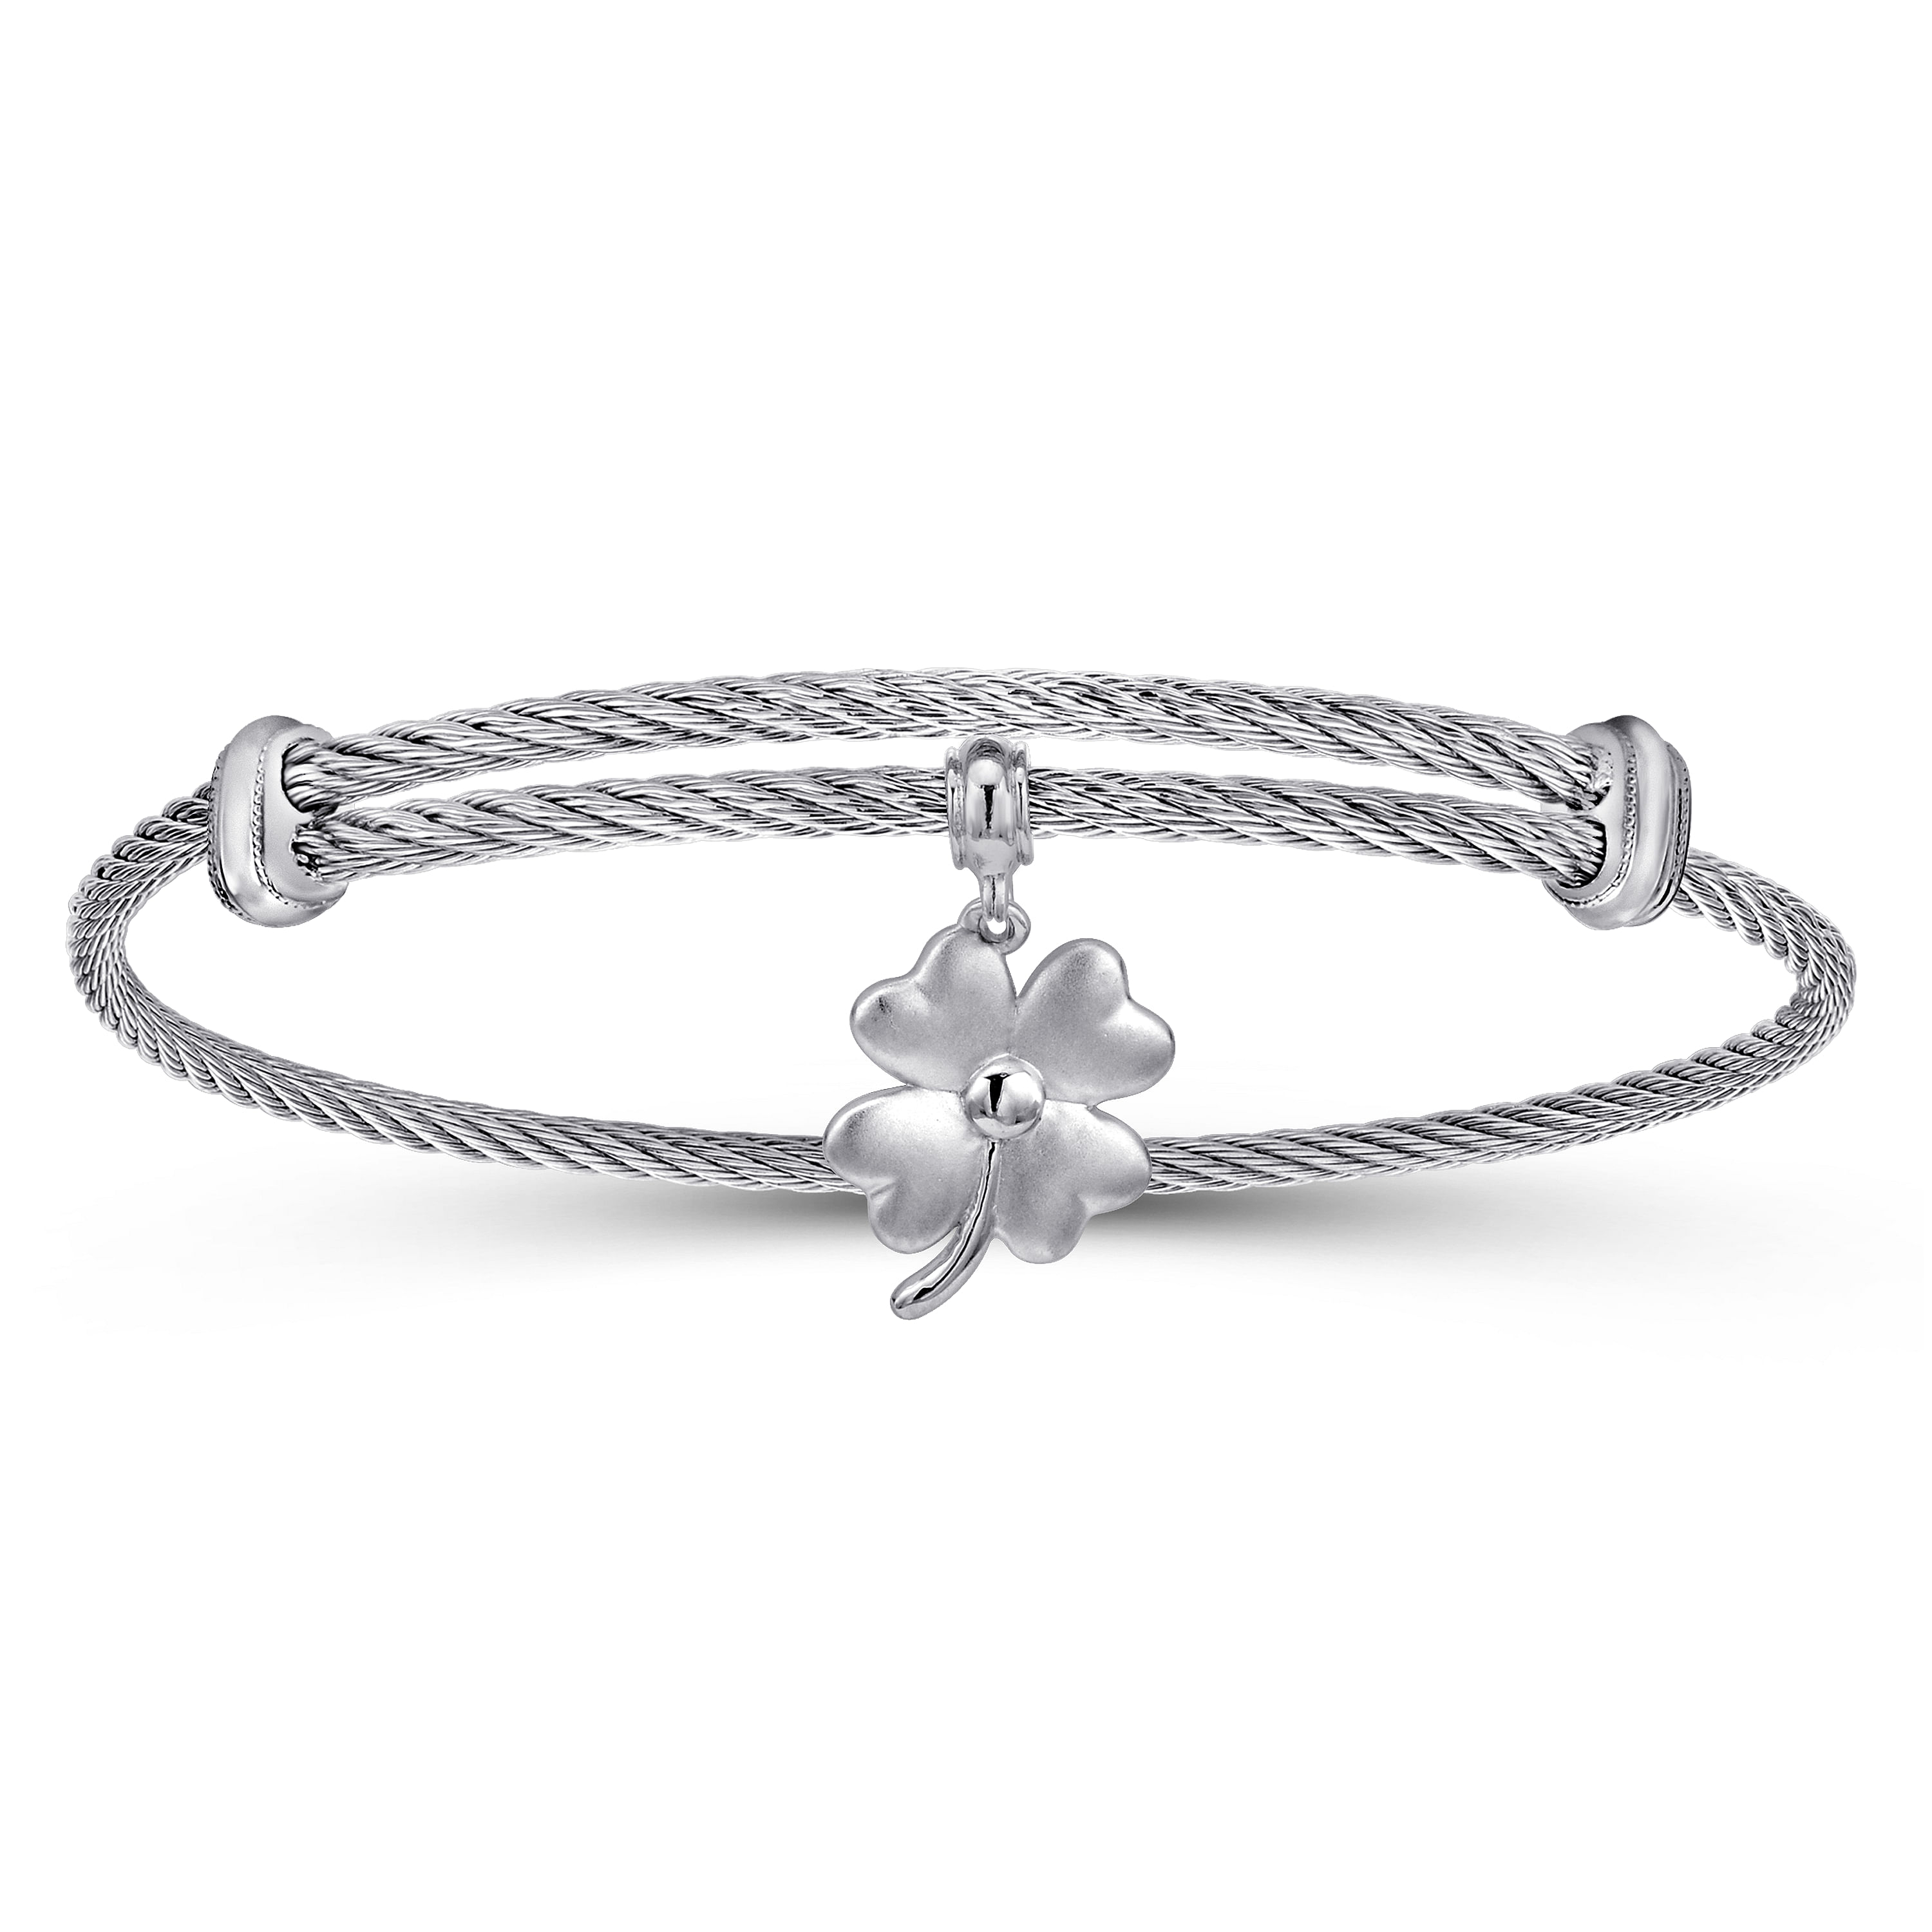 Adjustable Twisted Cable Stainless Steel Bangle with Sterling Silver 4 Leaf Clover Charm